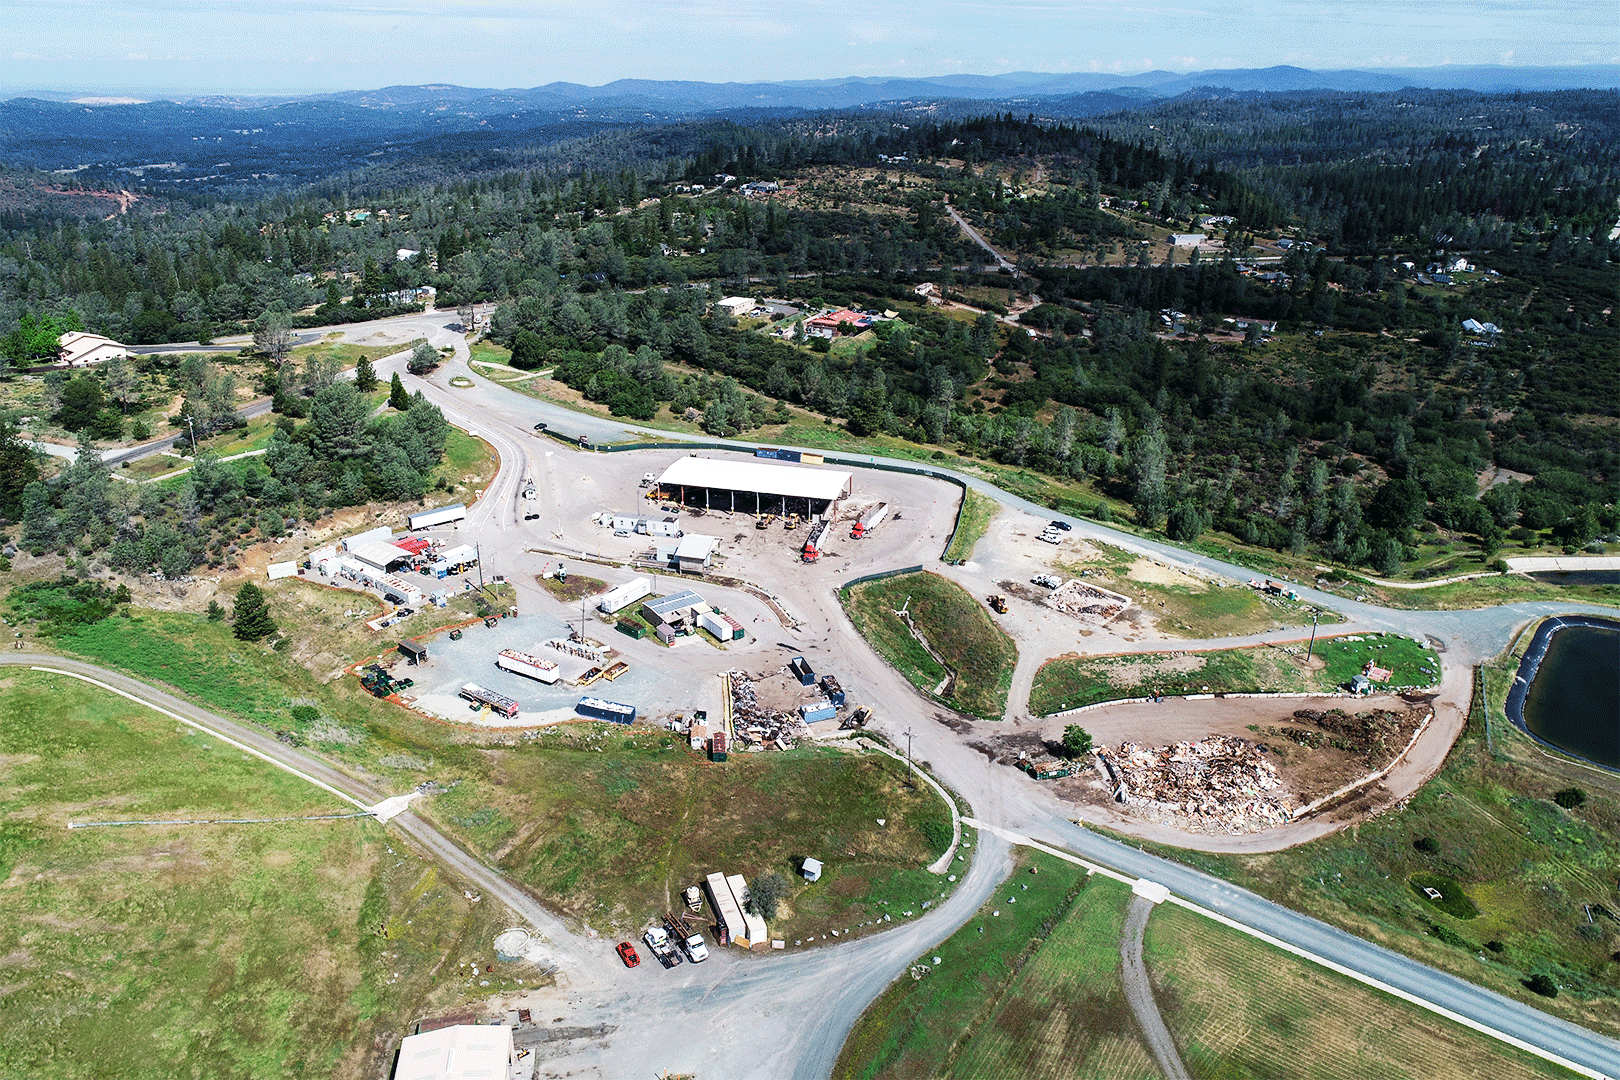 An aerial view shows the future overhead building and dock for trucks. From the building there is a road that wraps around the back to lead to the main road